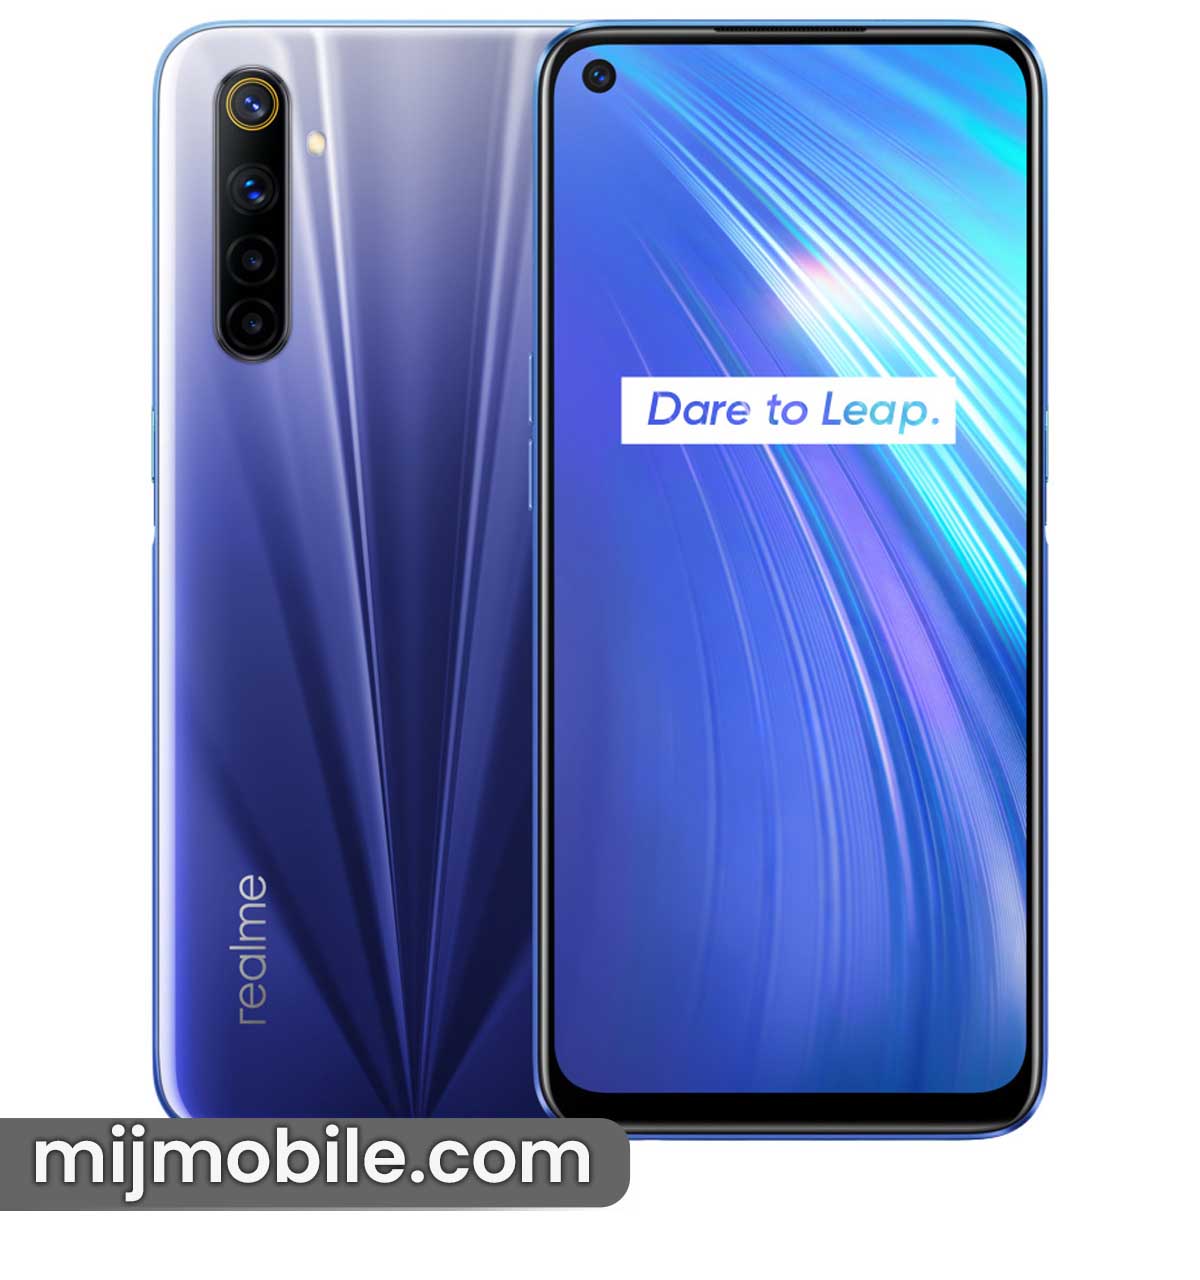 Realme 6 Price in Pakistan & Specifications Realme 6 Price in Pakistan is only 36,999.